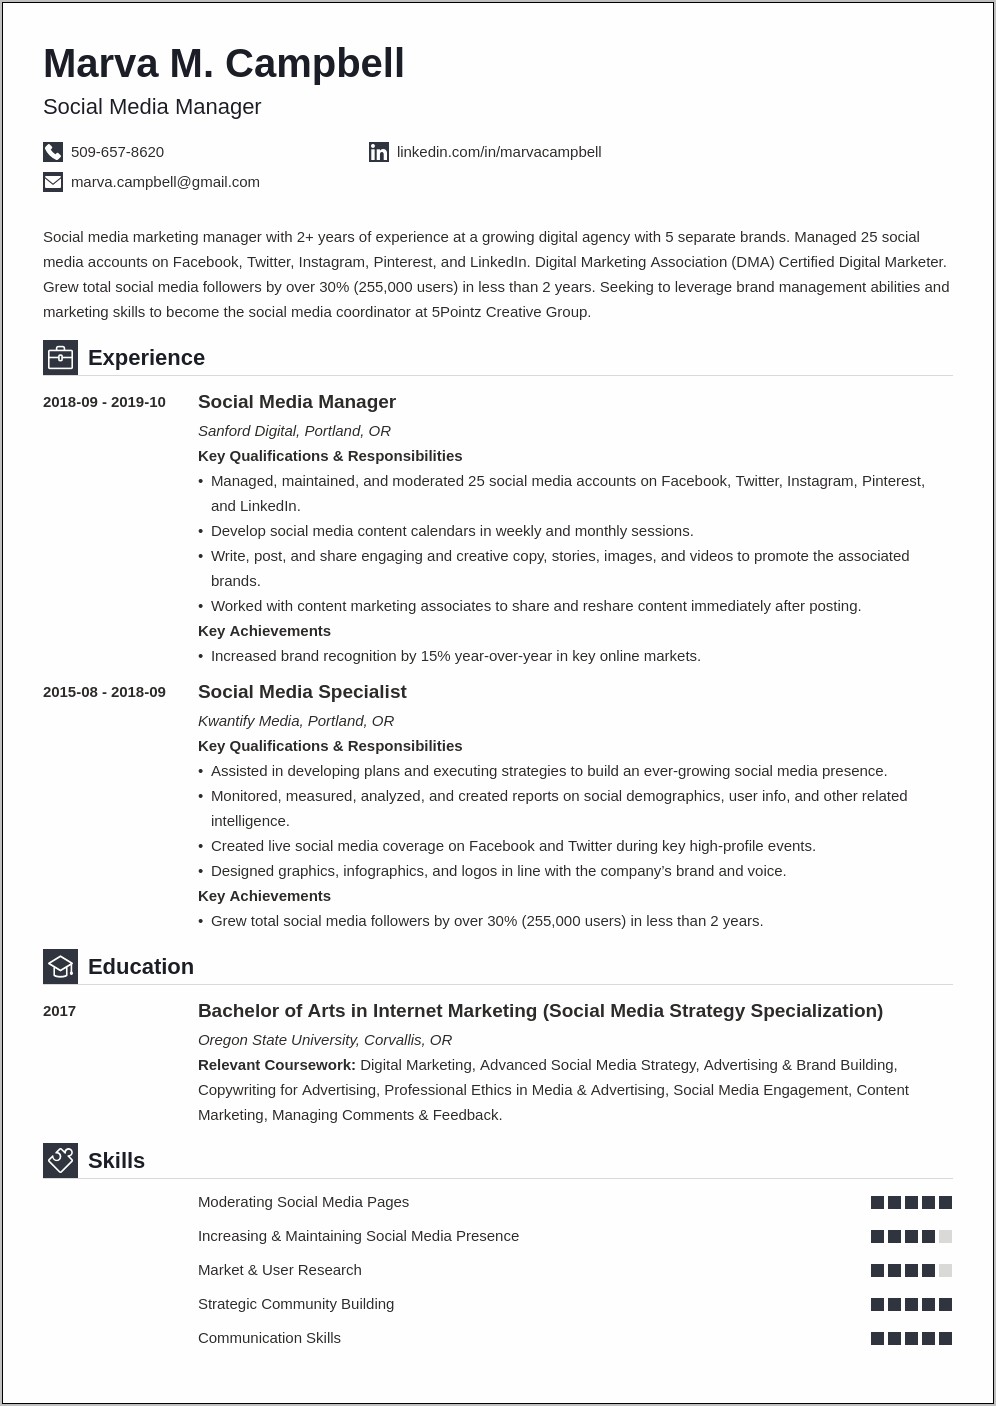 Professiona Summary For Resume For Media Specialist